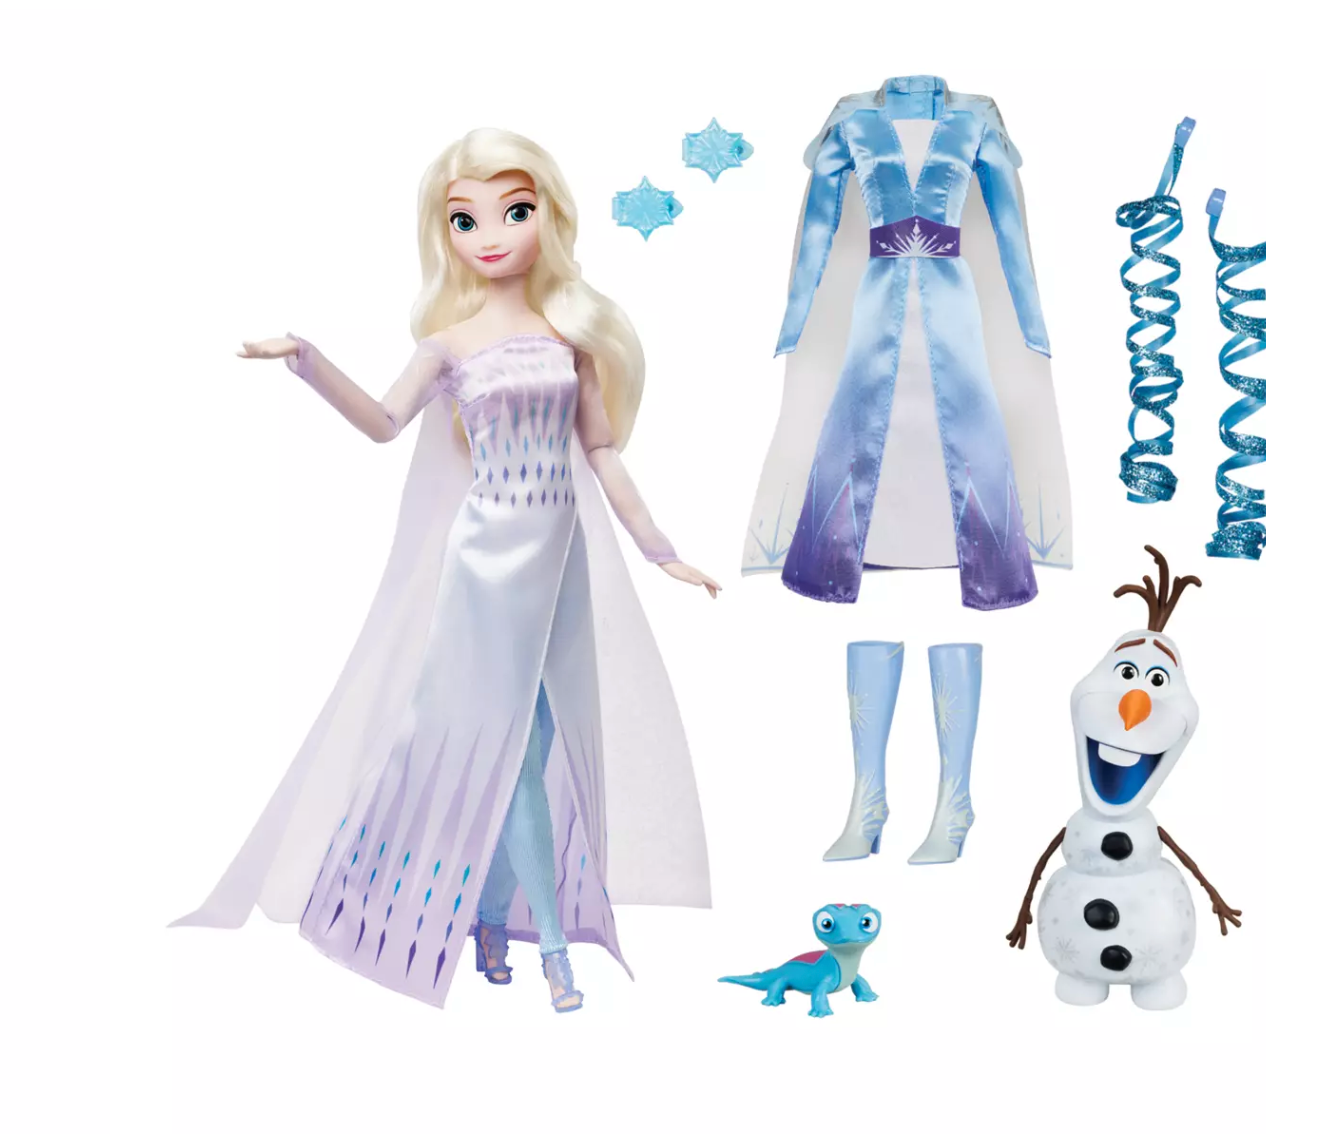 Disney Story Doll with Accessories and Activity Frozen Elsa New with Box